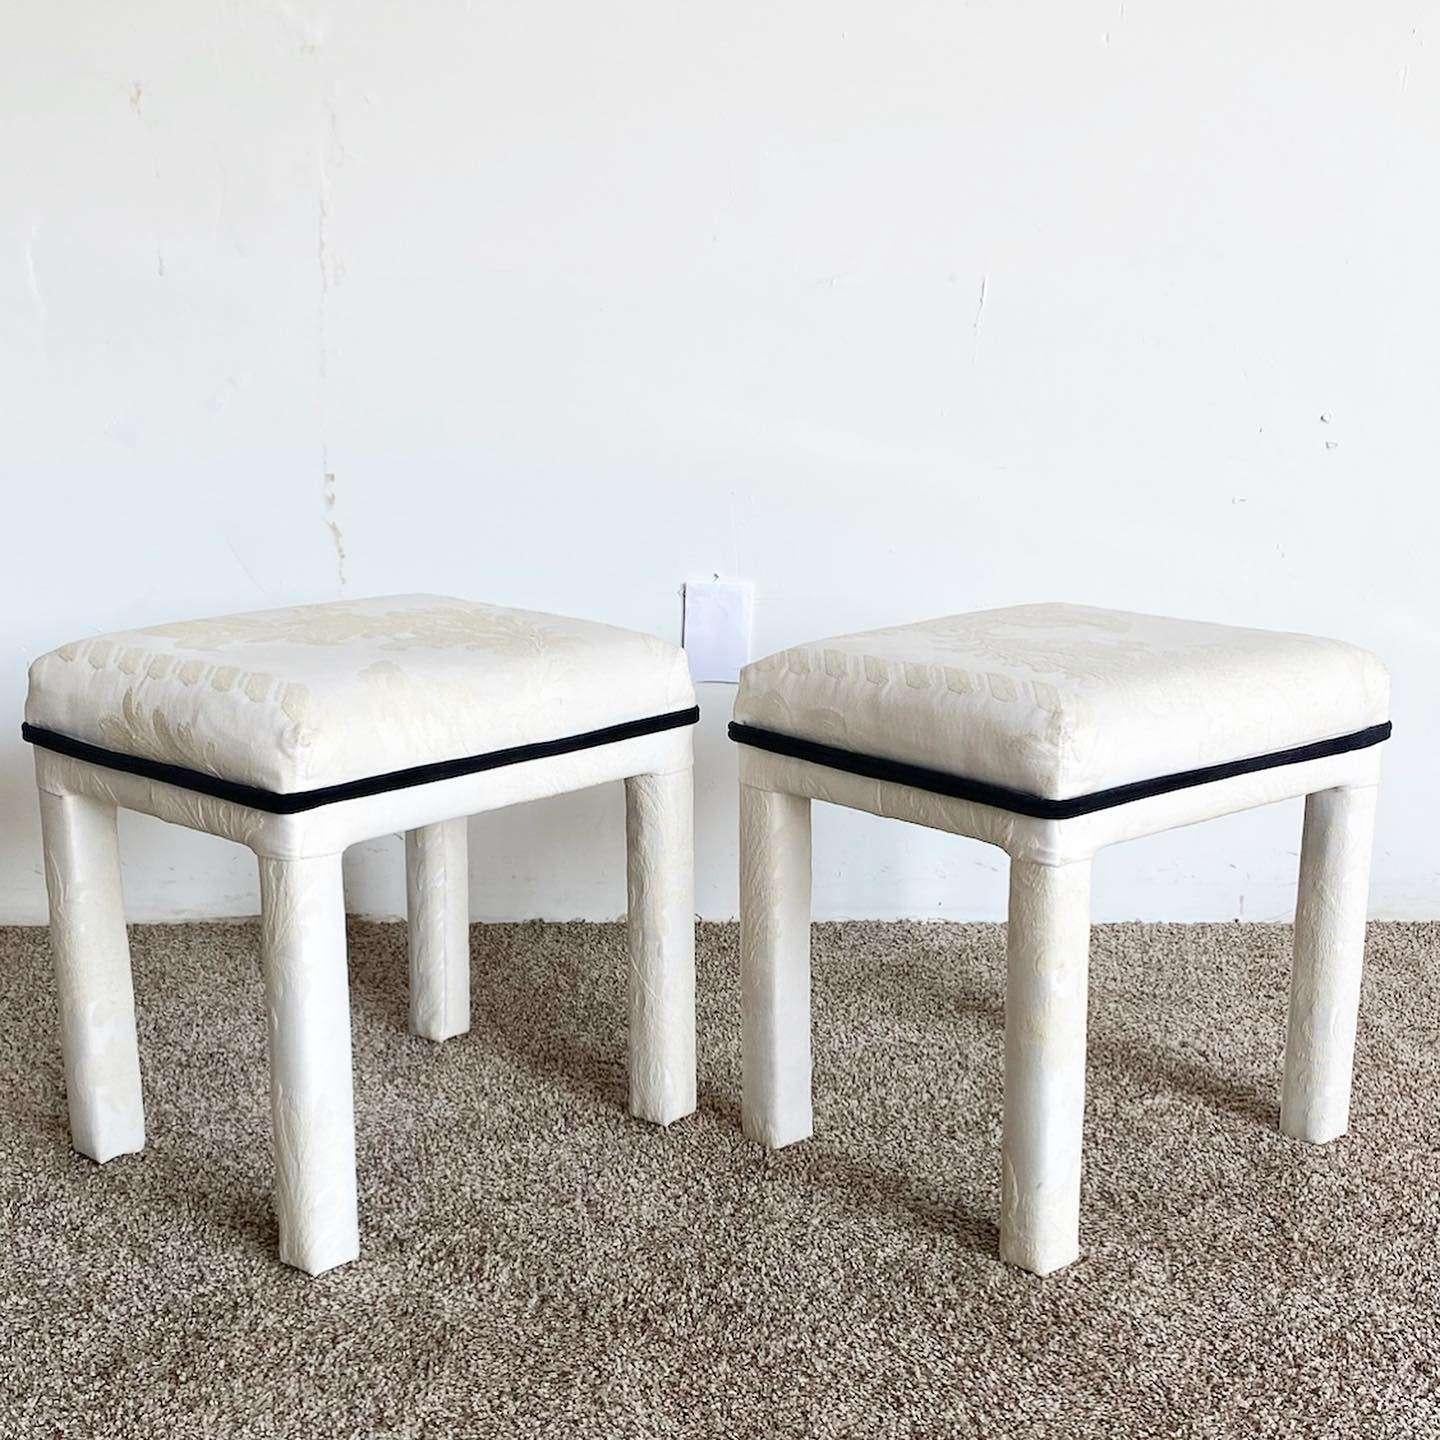 Exceptional pair of vintage postmodern parsons low stools. Each feature an off white floral fabric with black accenting.